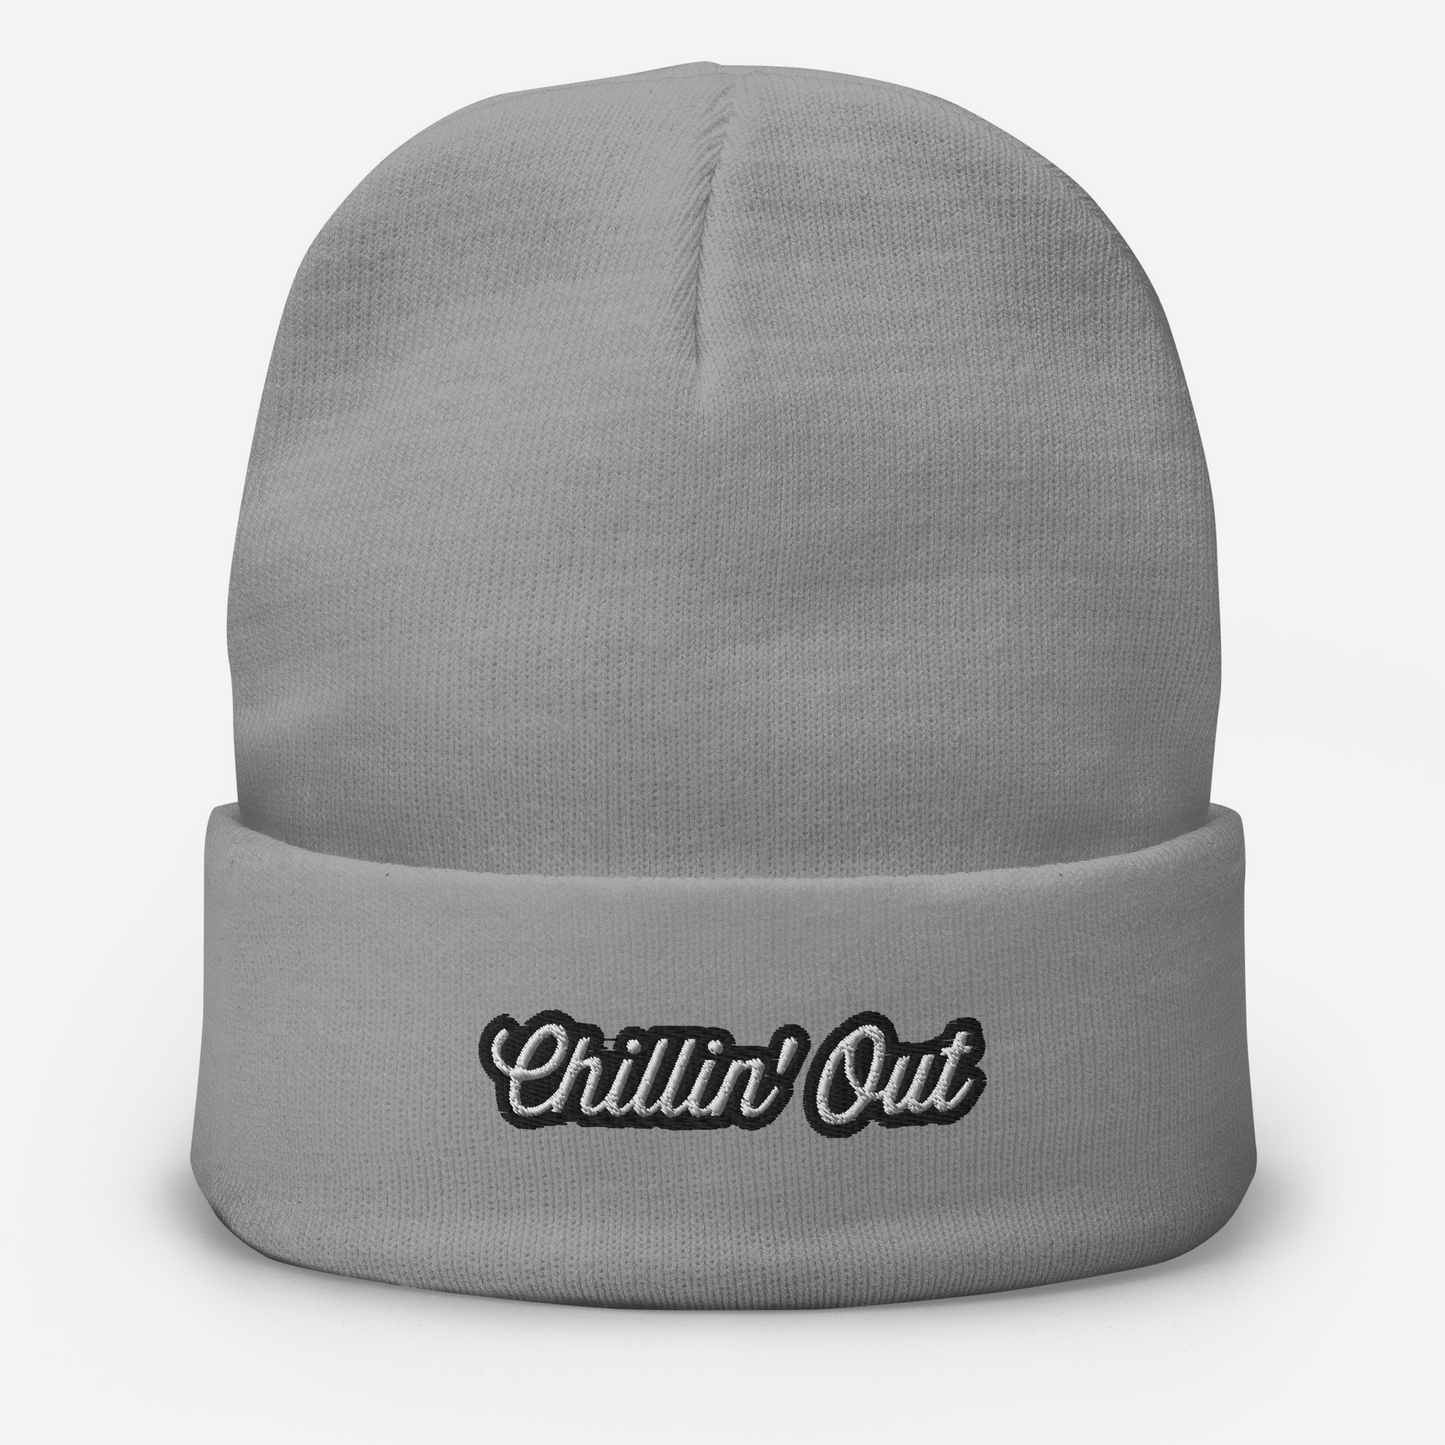 Chillin' Out - Embroidered Beanie